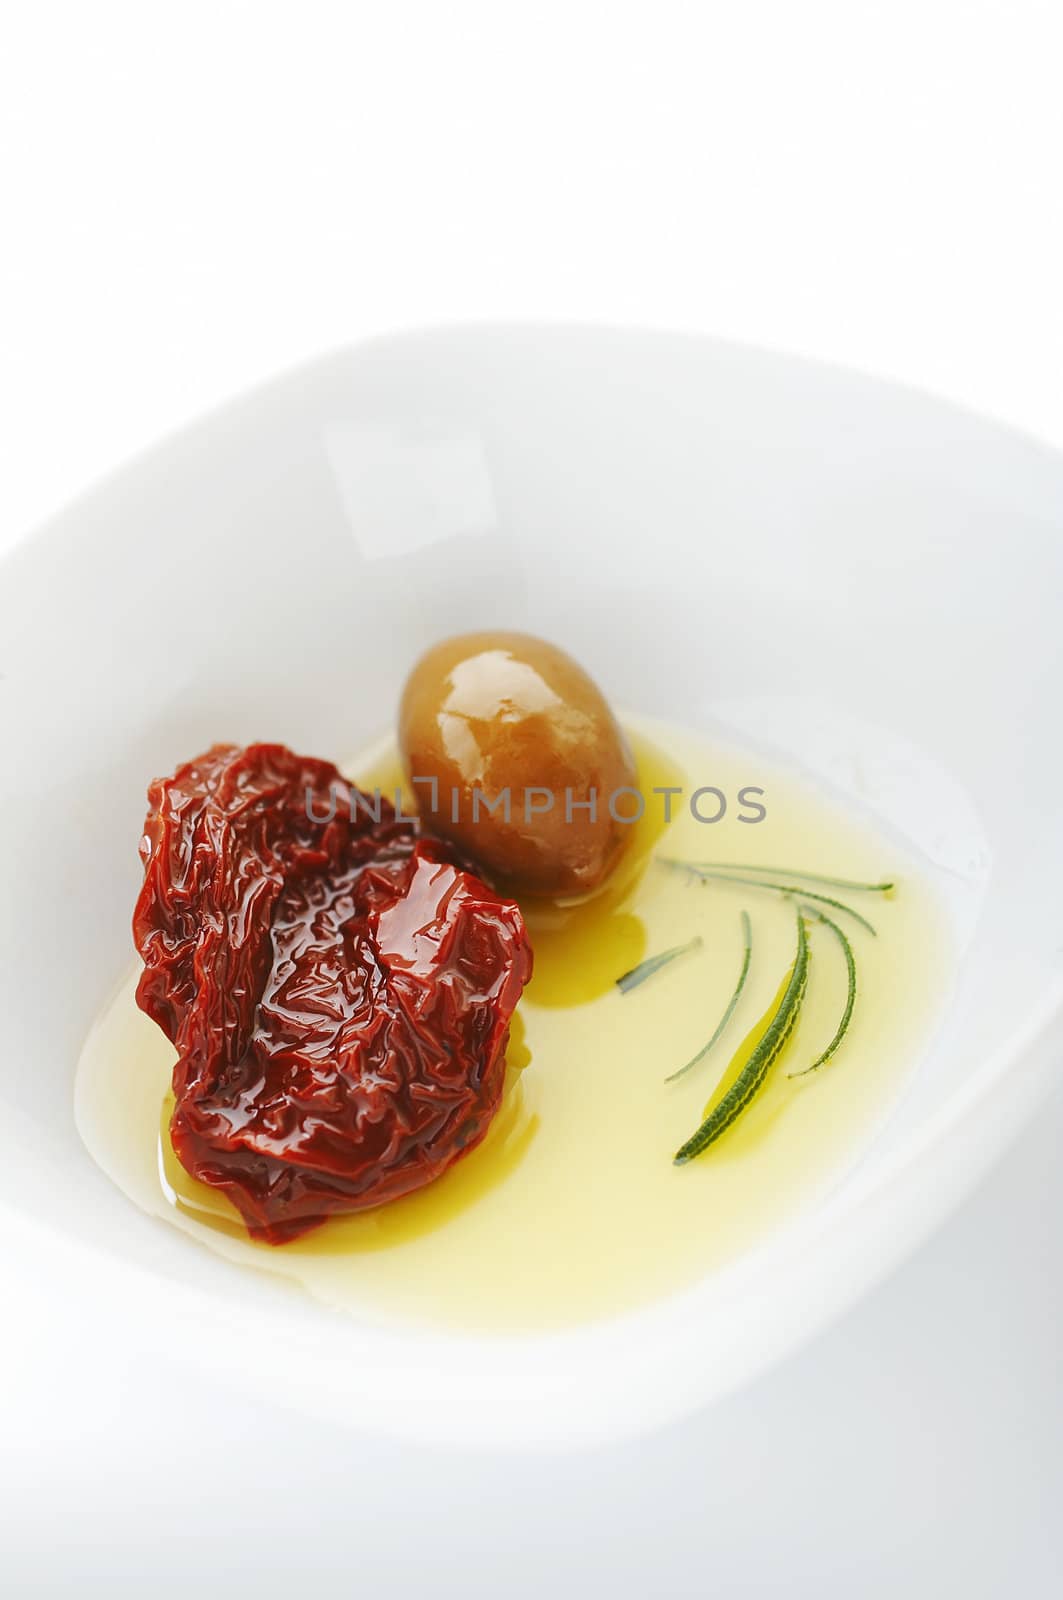 Olive and sun dried tomato with olive oil on the white plate